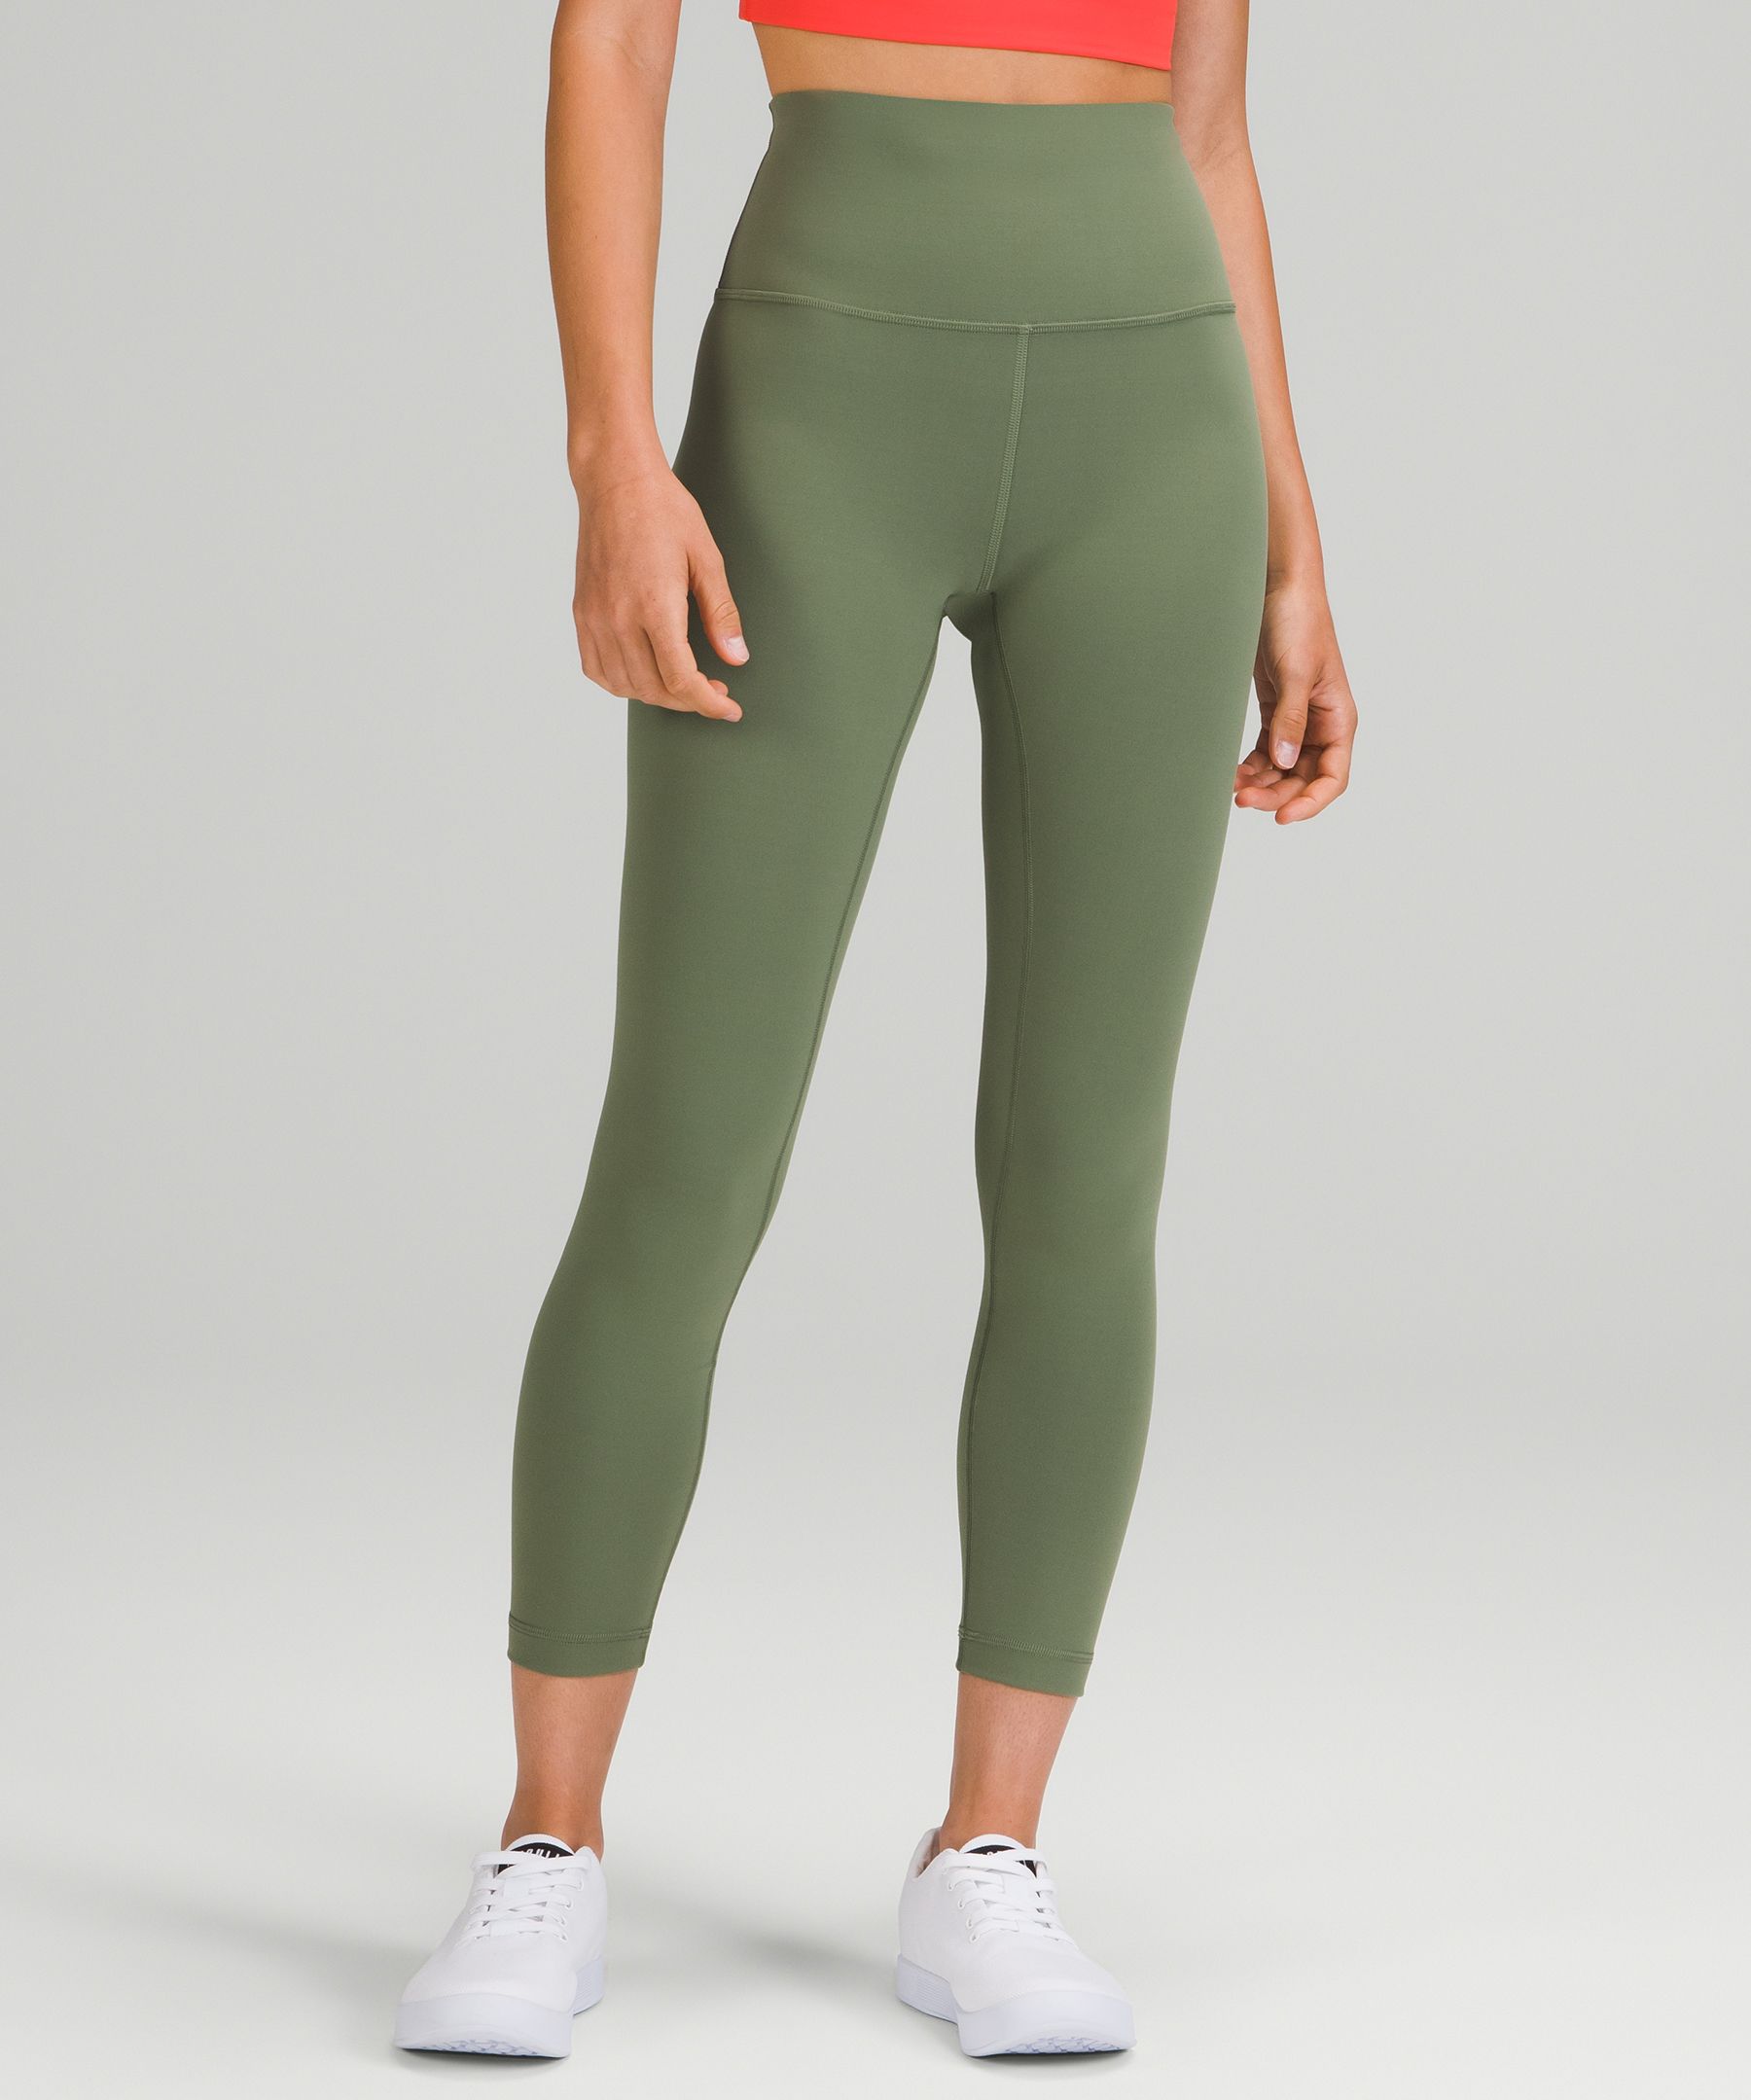 Lululemon Wunder Train High-rise Tights 25" In Green Twill